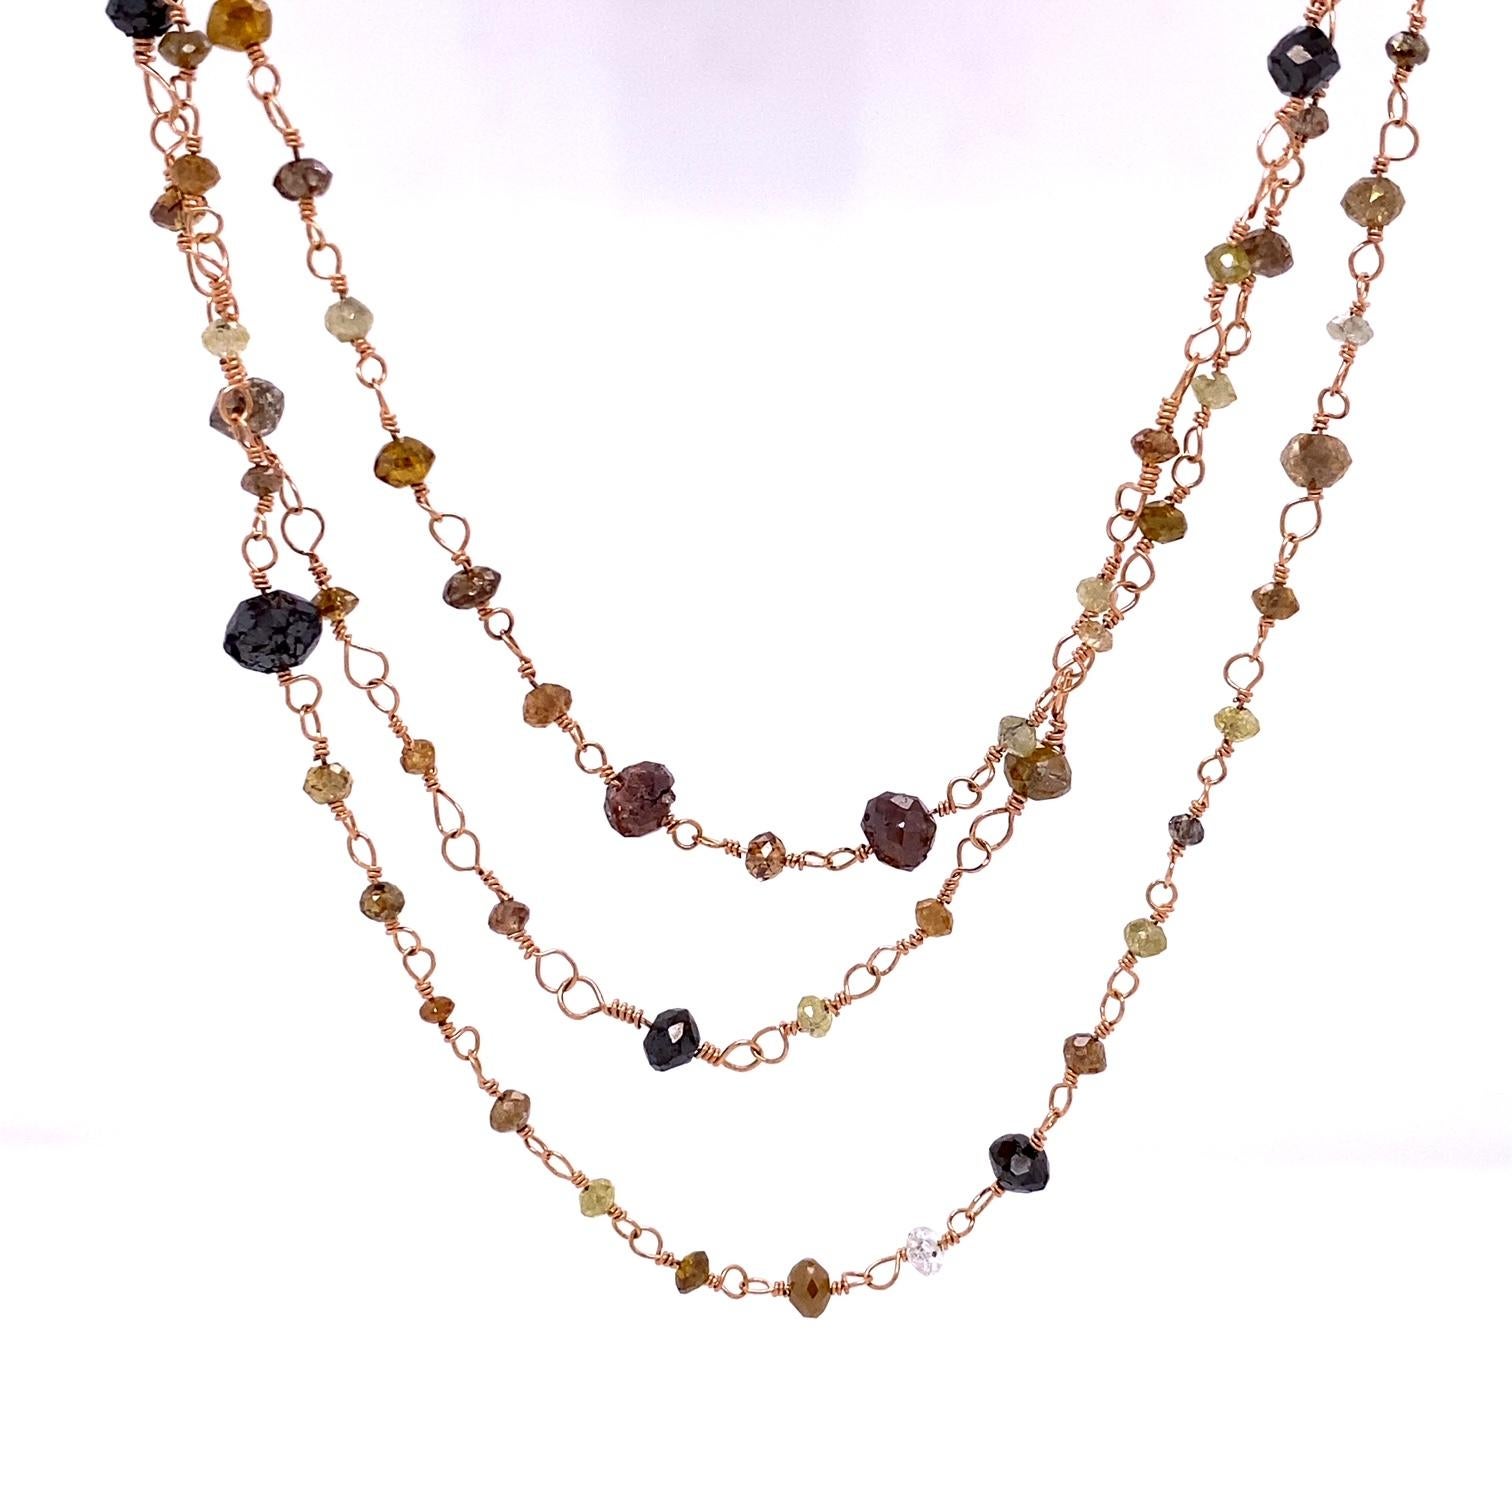 An 56 inch 18k rose gold wired necklace with multicolor diamonds, 28.01 total carat weight. This necklace was designed and made by llyn strong.